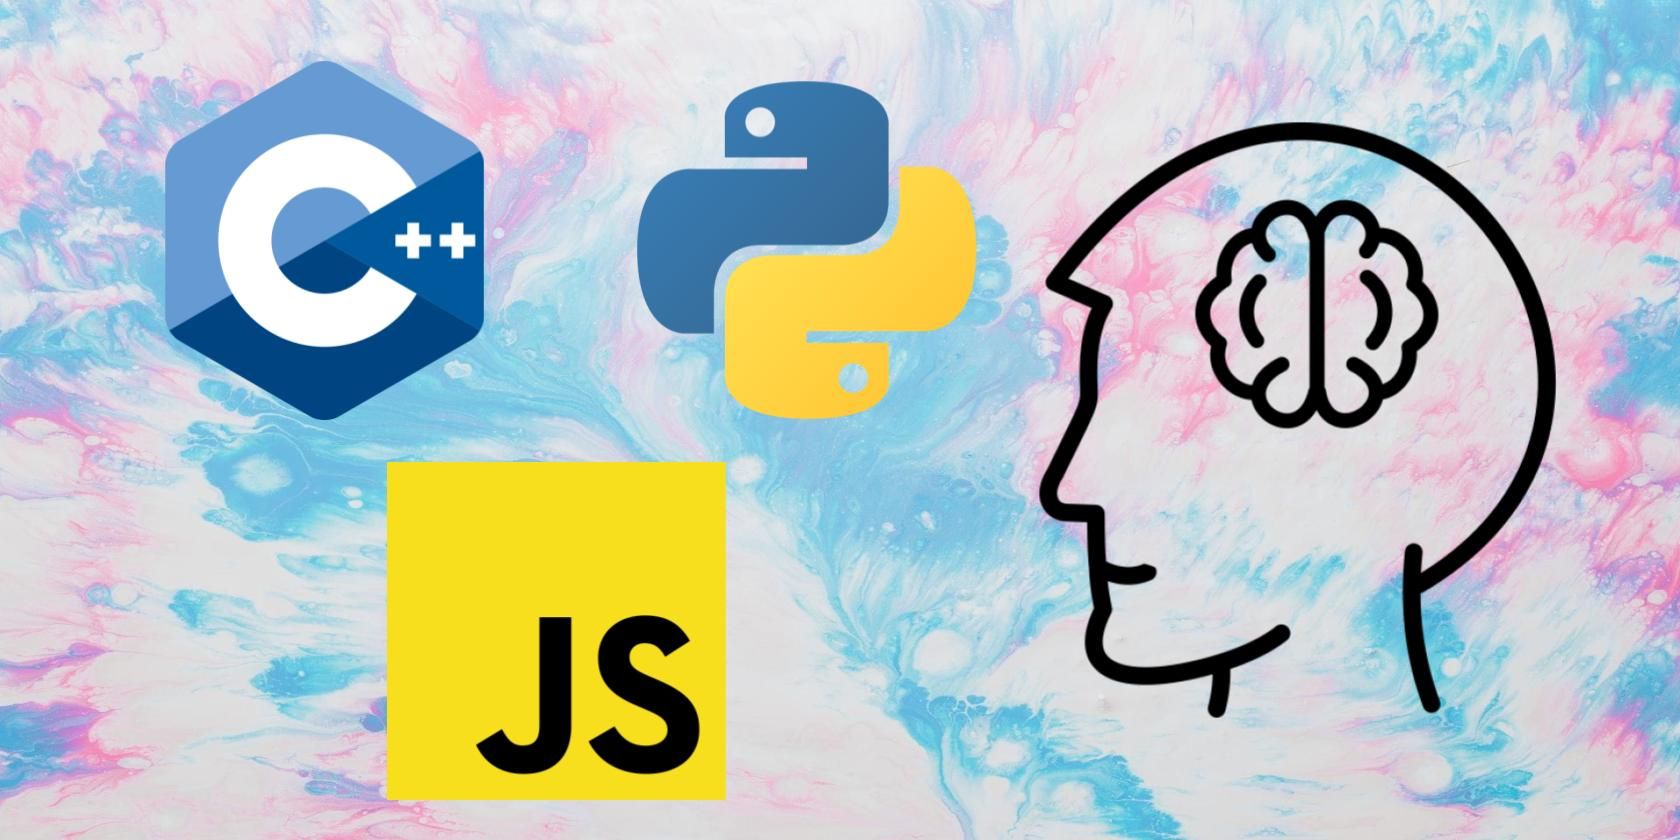 Factors of a number using C++, Python, JavaScript with Human Brain